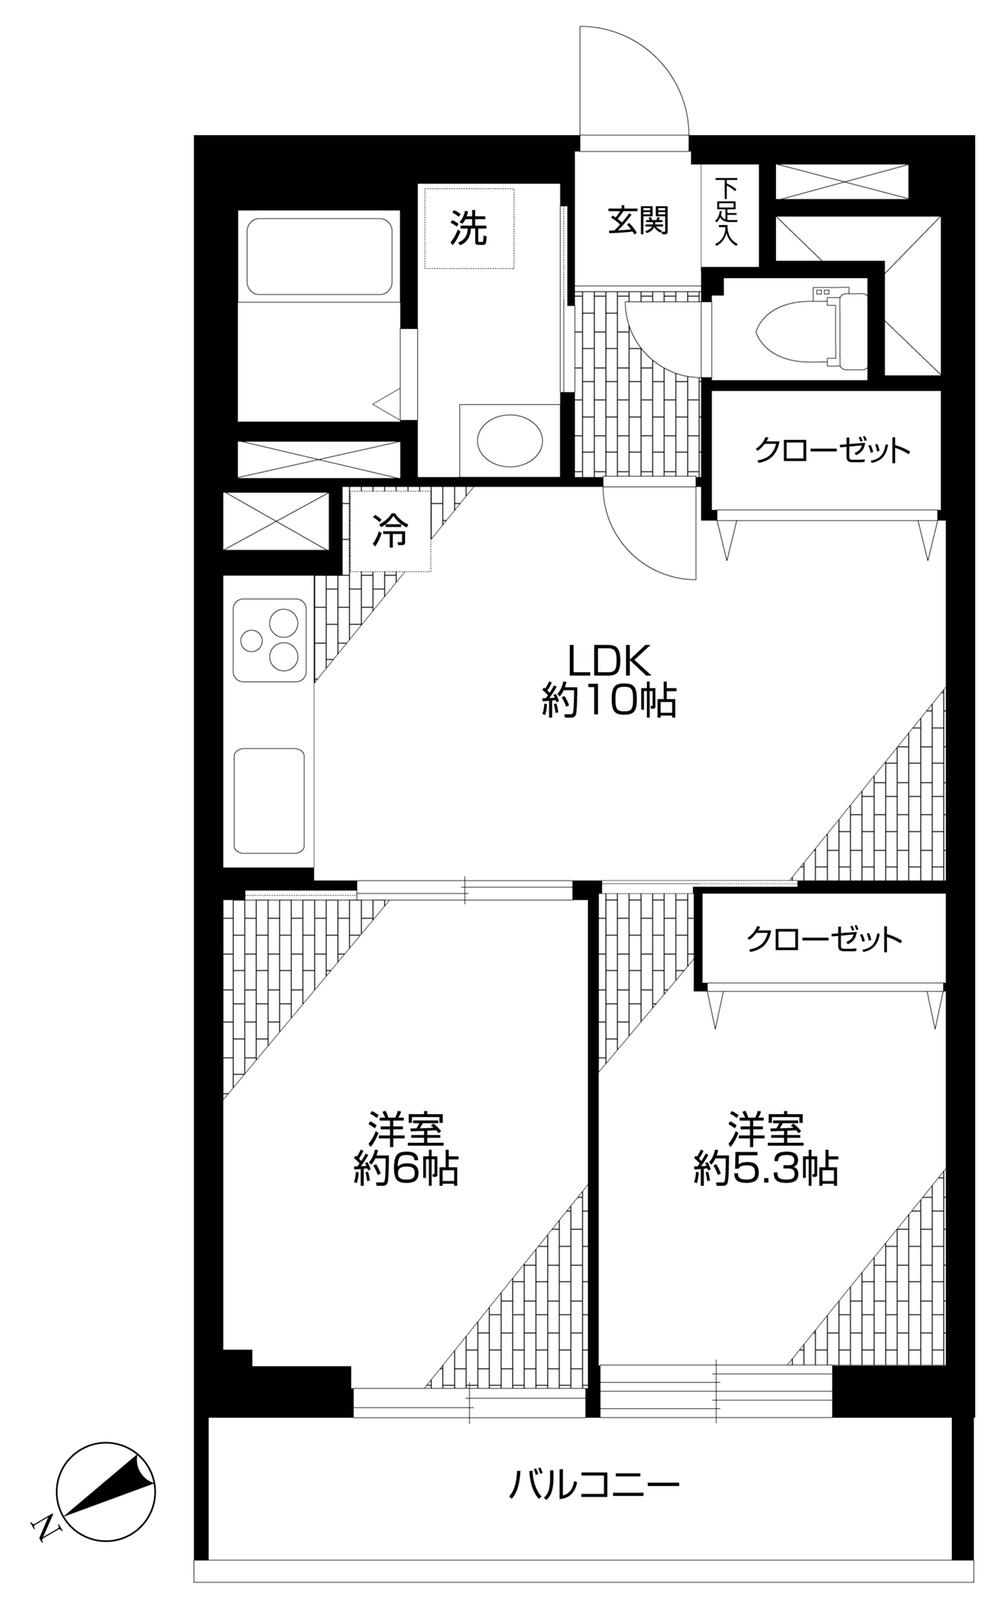 Floor plan. 2LDK, Price 18,800,000 yen, Occupied area 50.05 sq m , Balcony area 6.6 sq m our plan view (floor plan of your choice, You can change to specification)